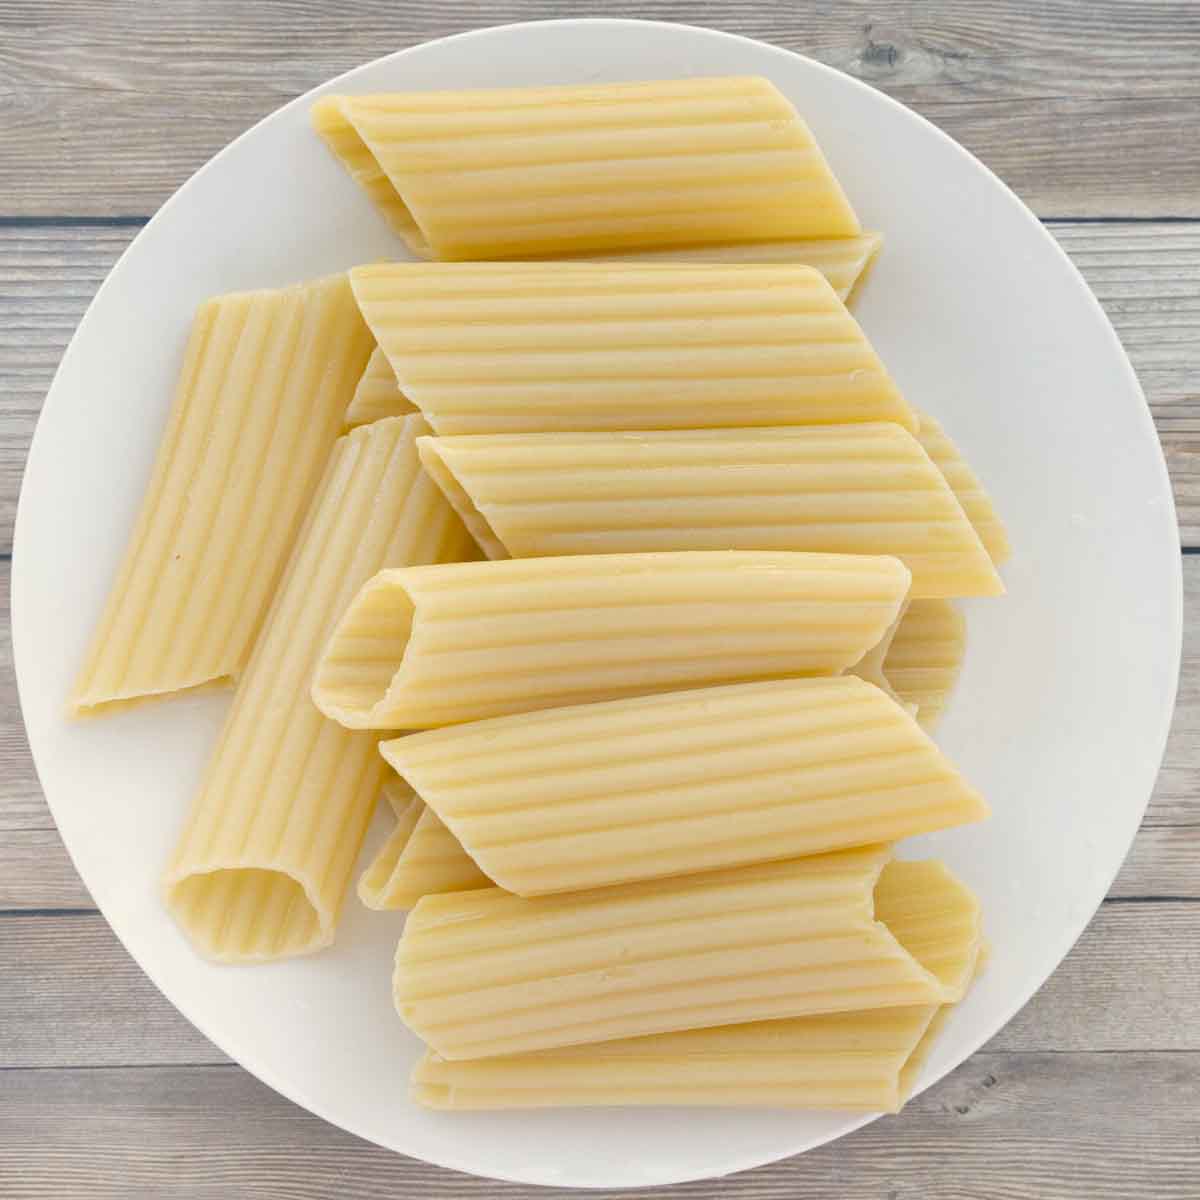 cooked pasta tubes on a white plate.